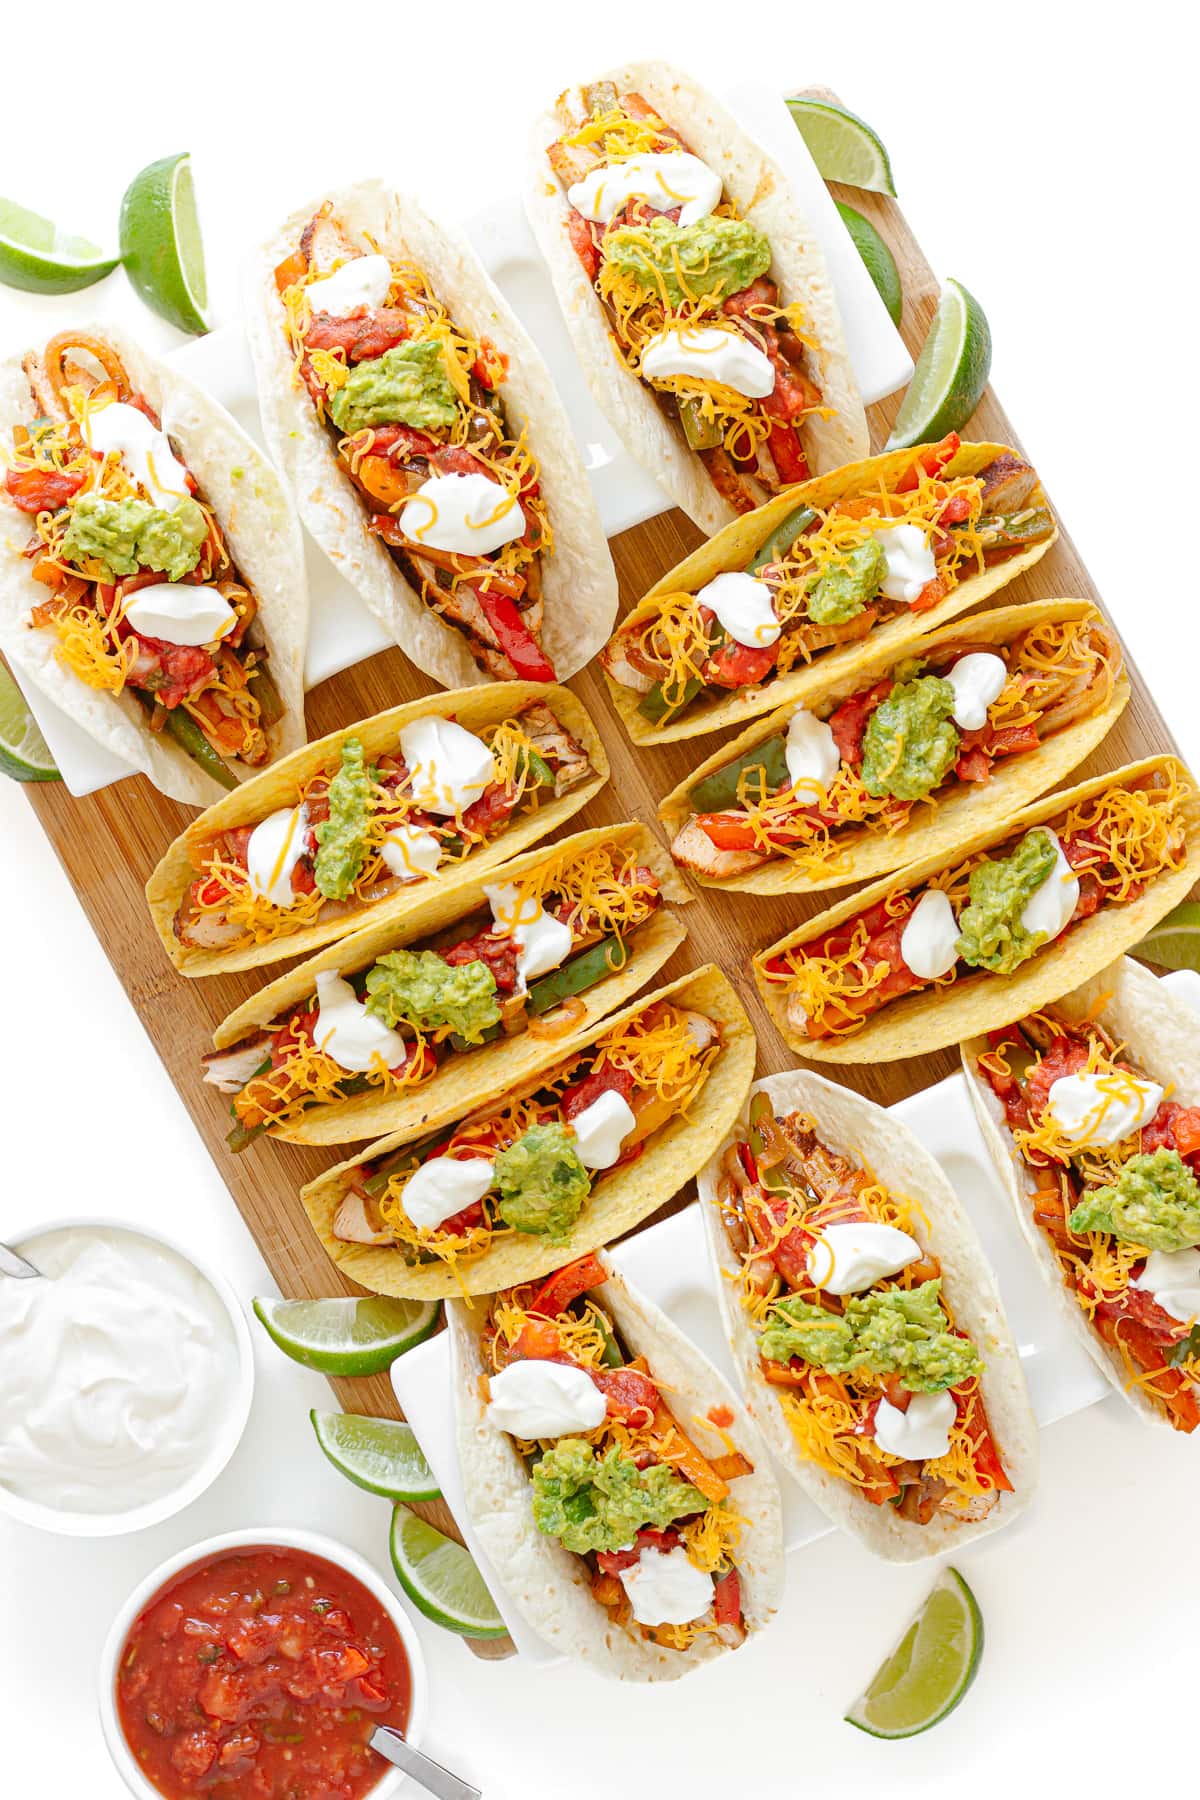 Chicken Fajita Tacos board featuring a mix of soft and hard shell tacos.